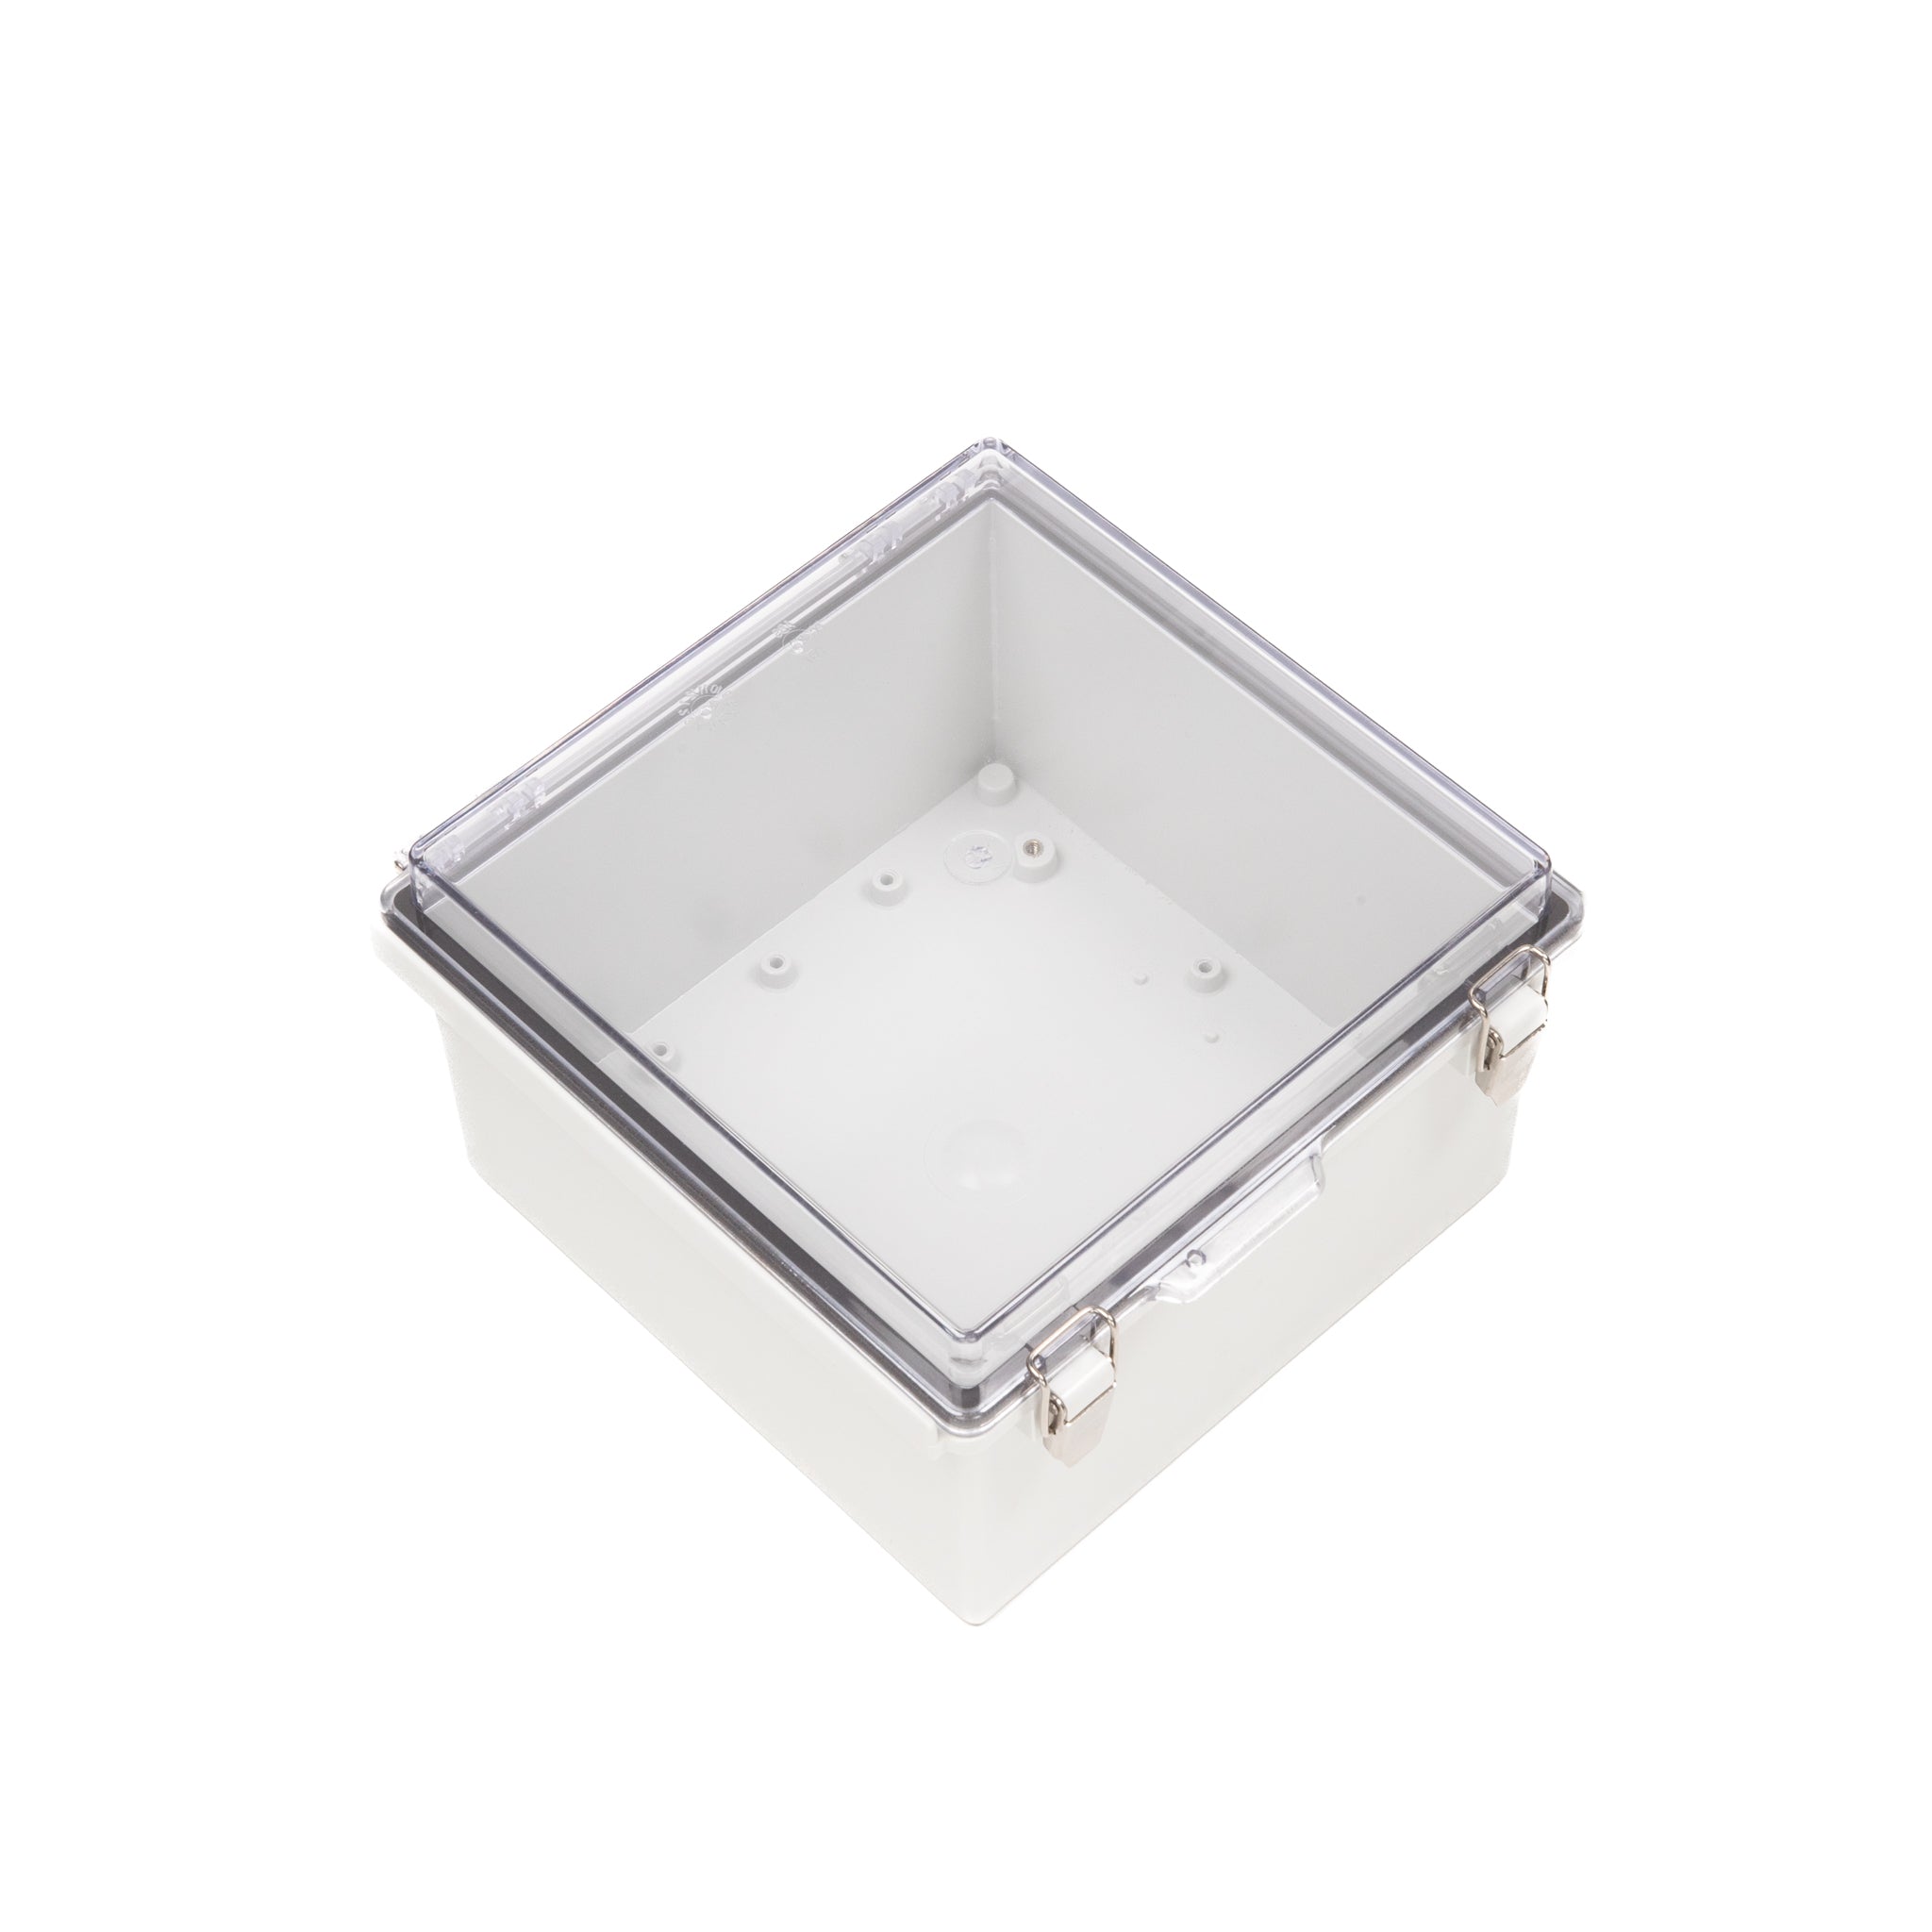 Boxco P-Series 8.27 x 8.27 x 5.12 Inches(210 x 210 x 130mm) Plastic  Enclosure, IP67, IK08, PC, Transparent Cover, Molded Hinge and Latch Type